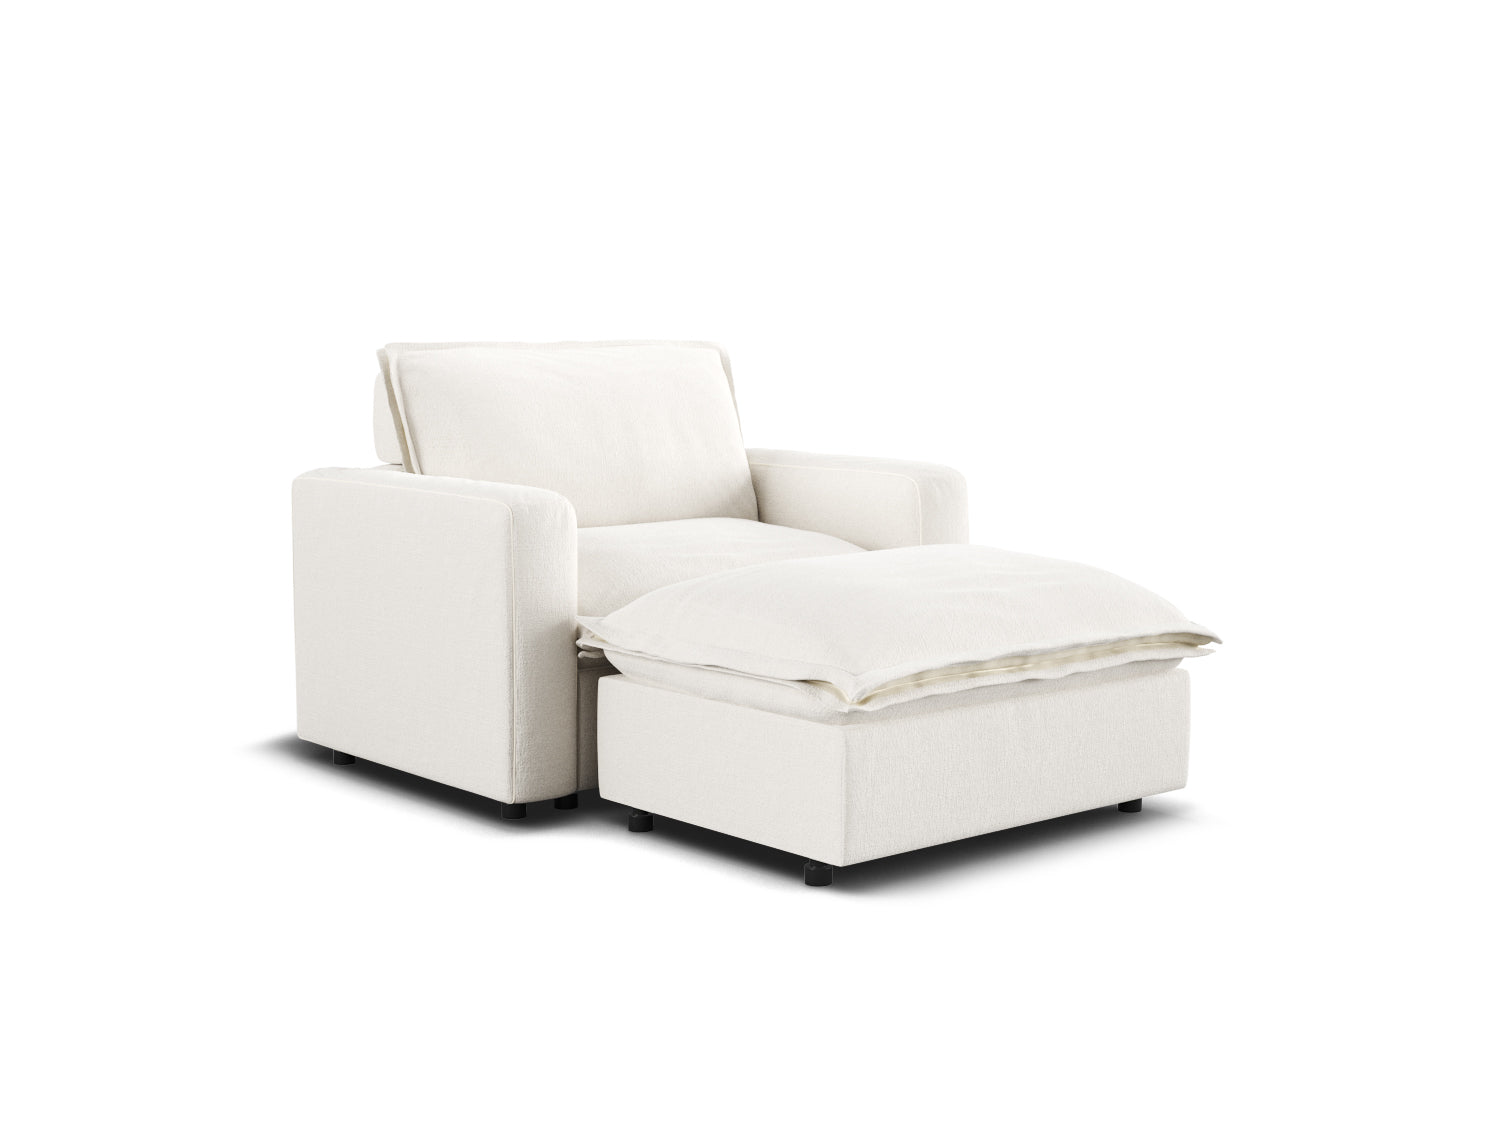 The Chaise Slipcover